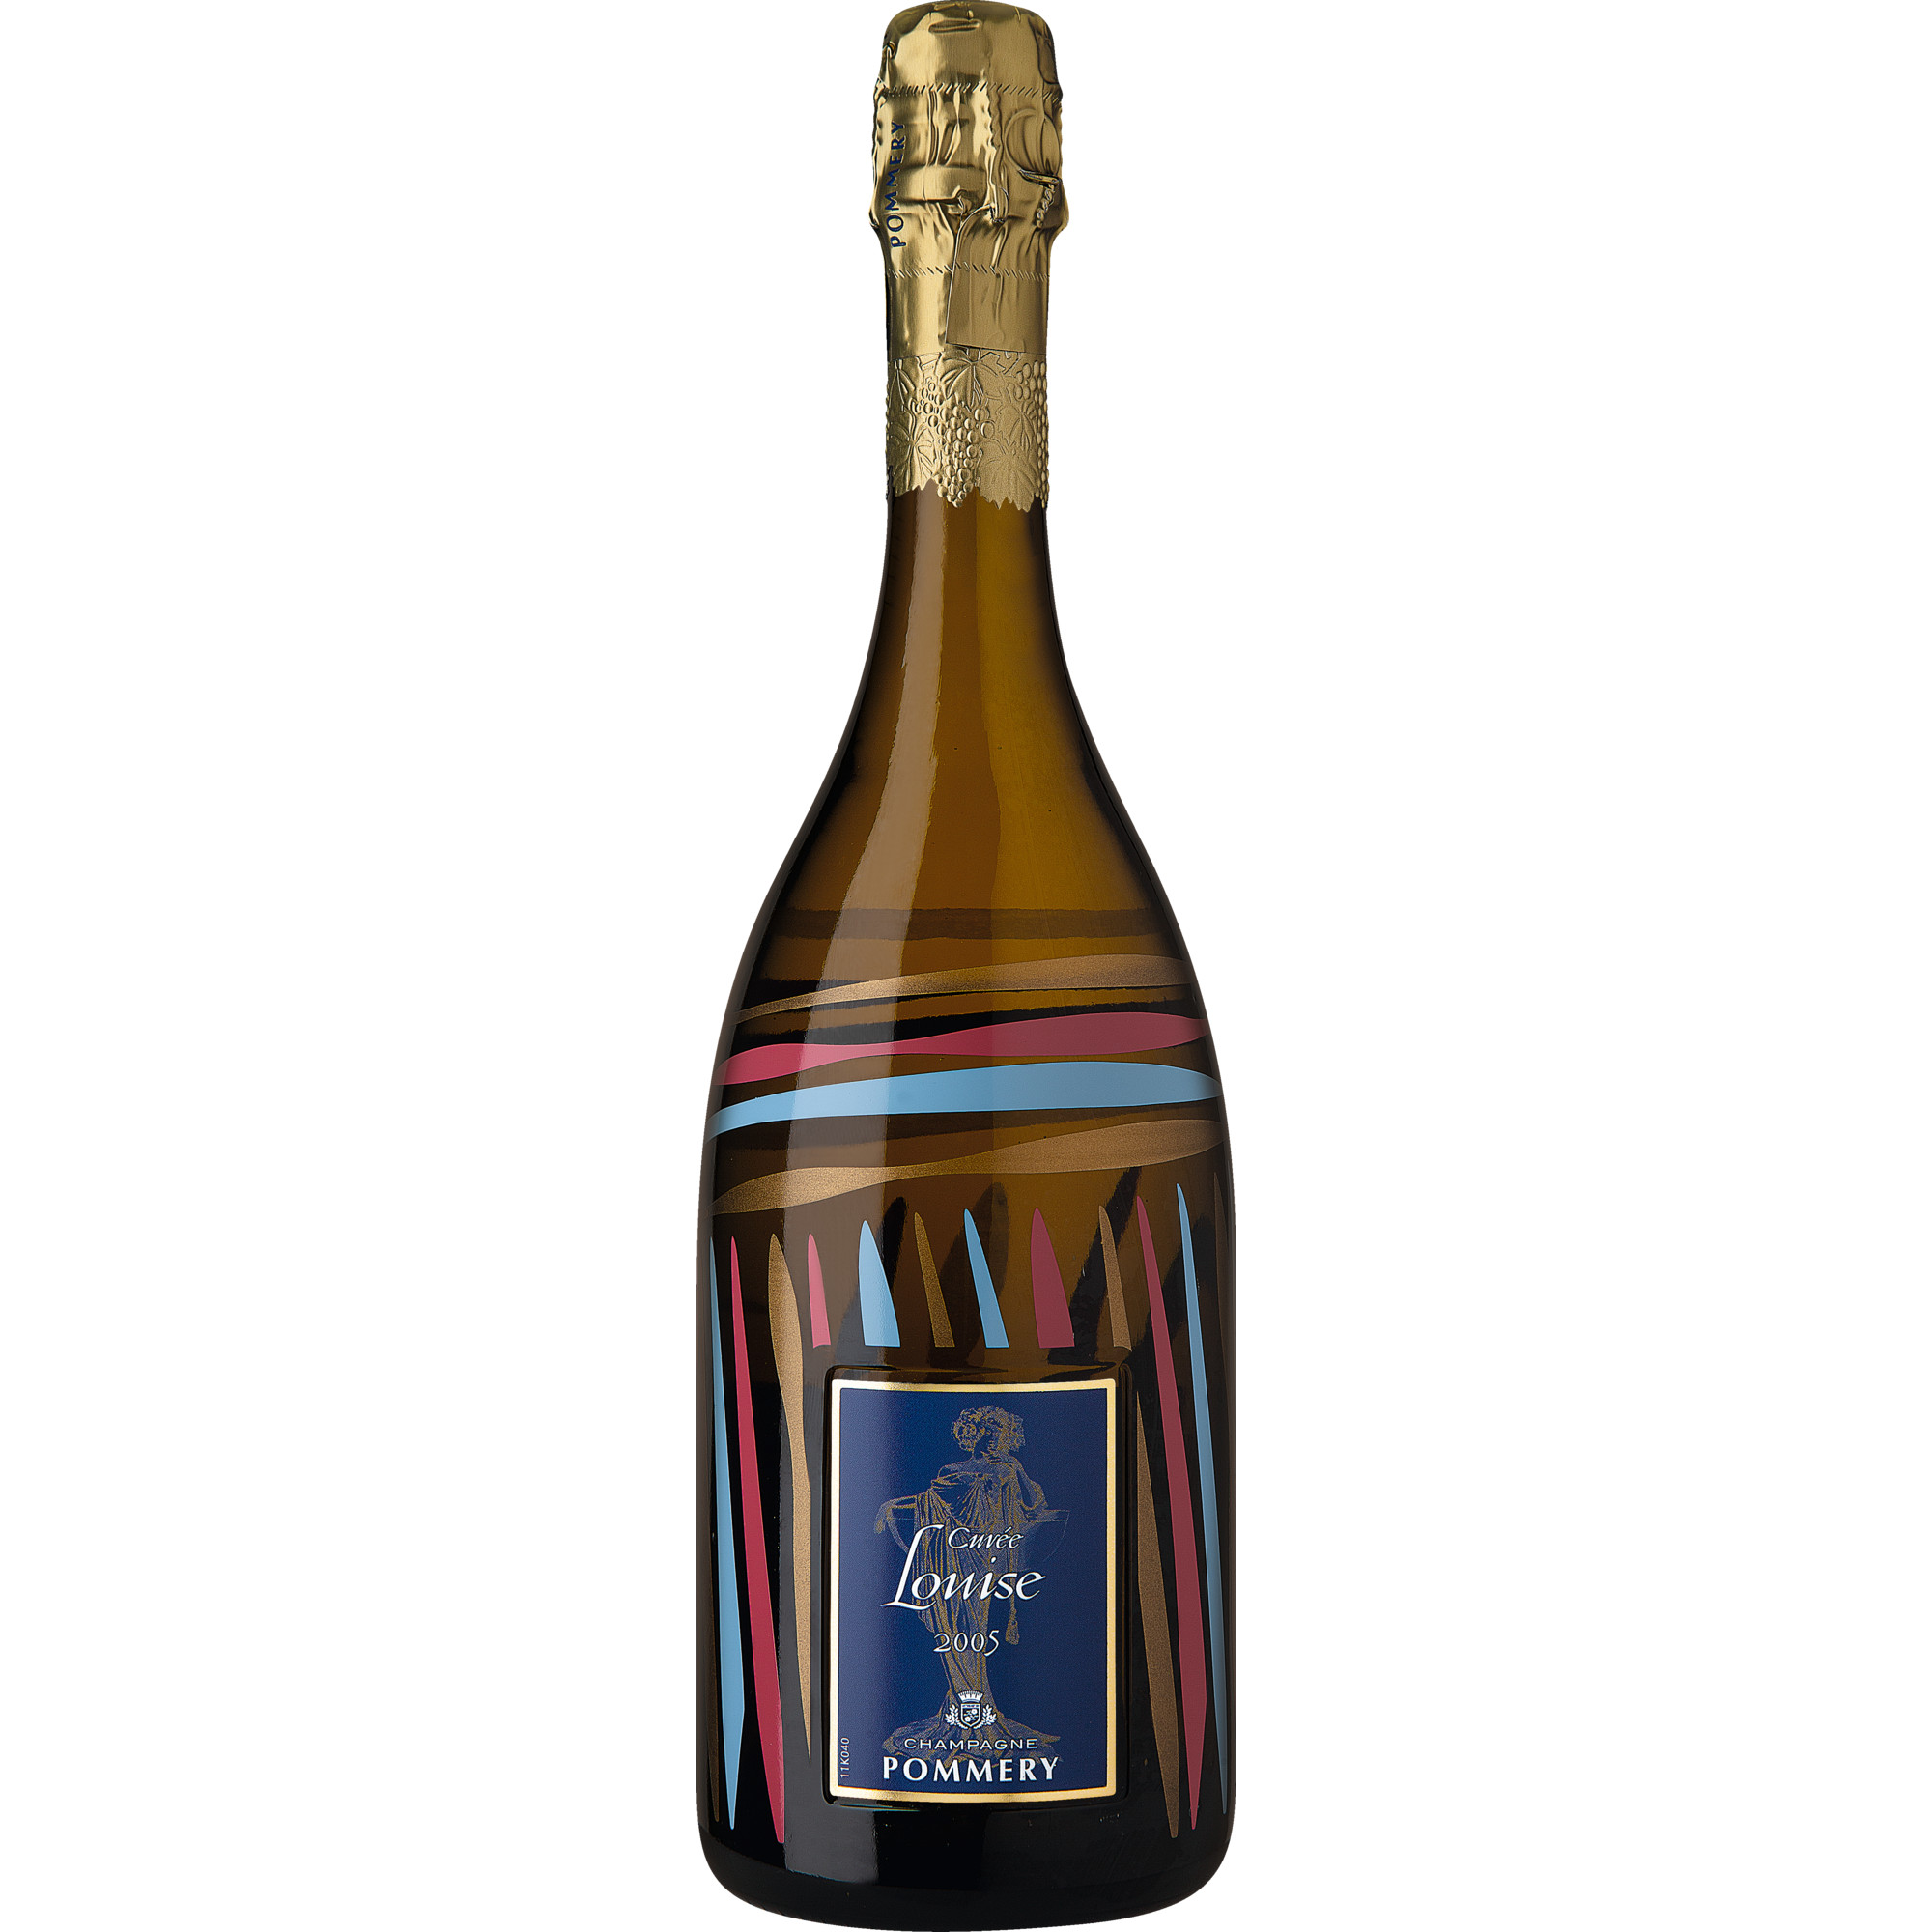 Champagne Cuvée Louise Pommery Édition Parcelle, Brut, Champagne AC, Geschenketui, Champagne, 2005, Schaumwein  Champagner Hawesko